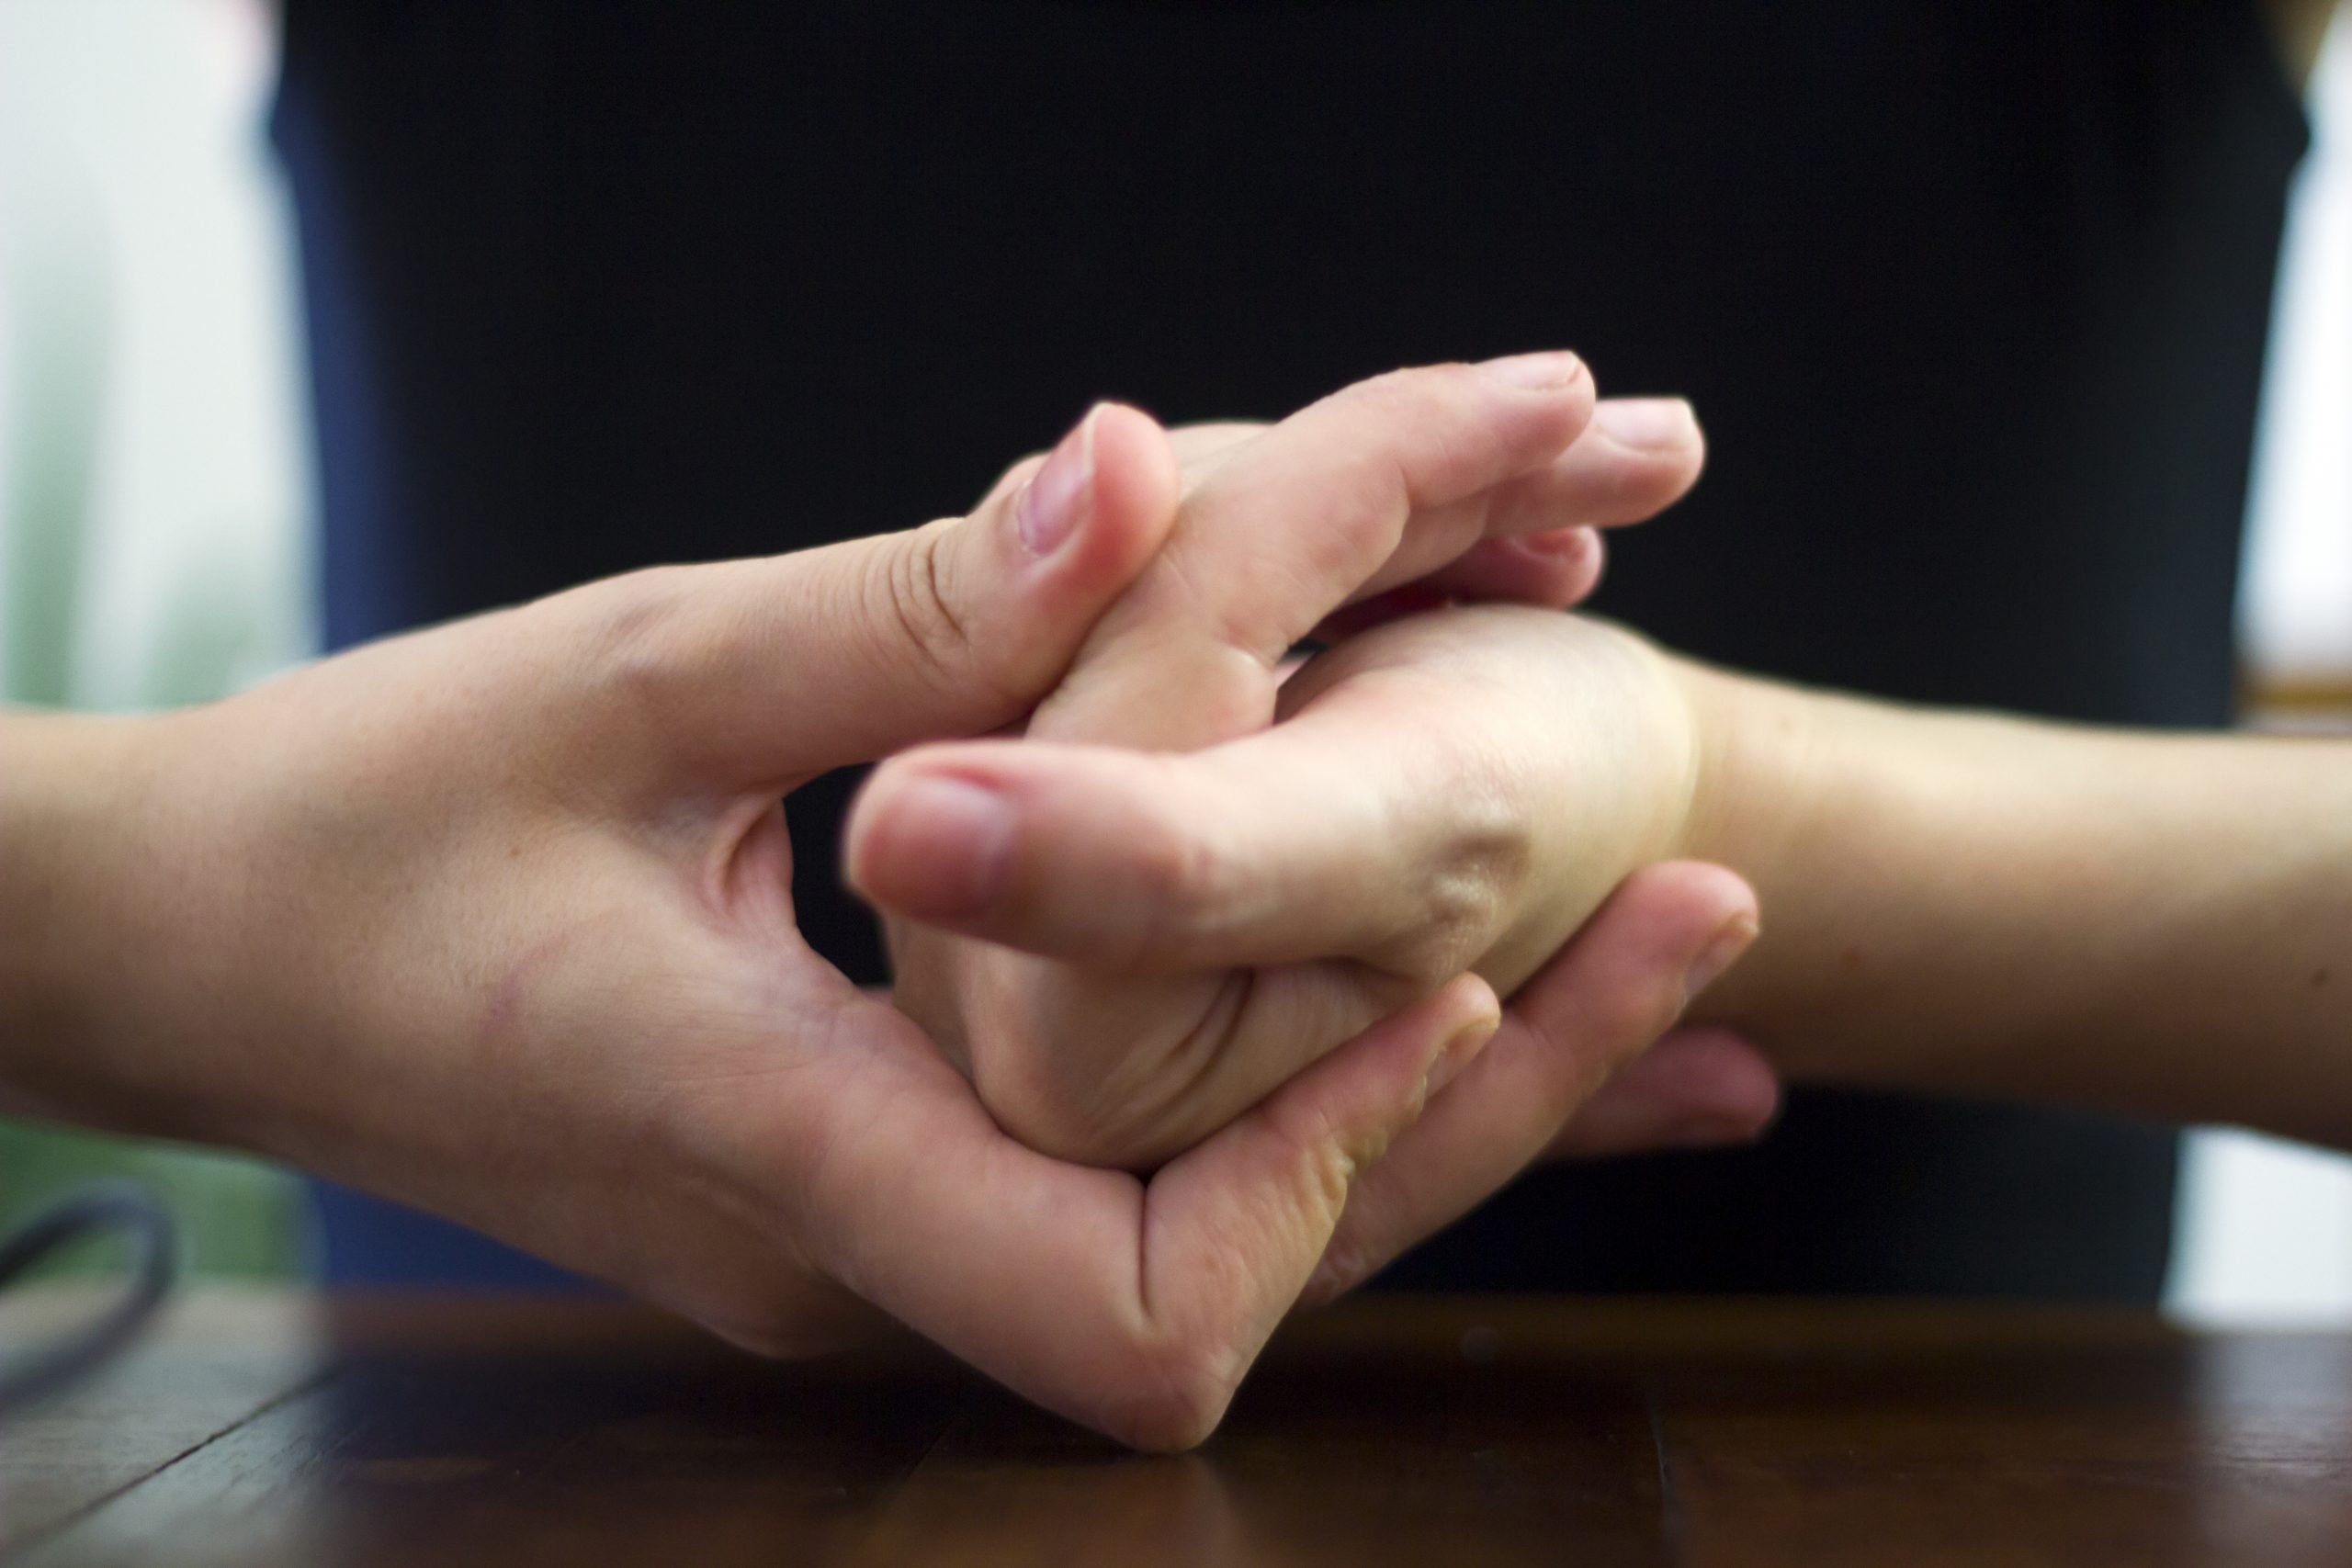 Will Cracking Your Knuckles Cause Arthritis?